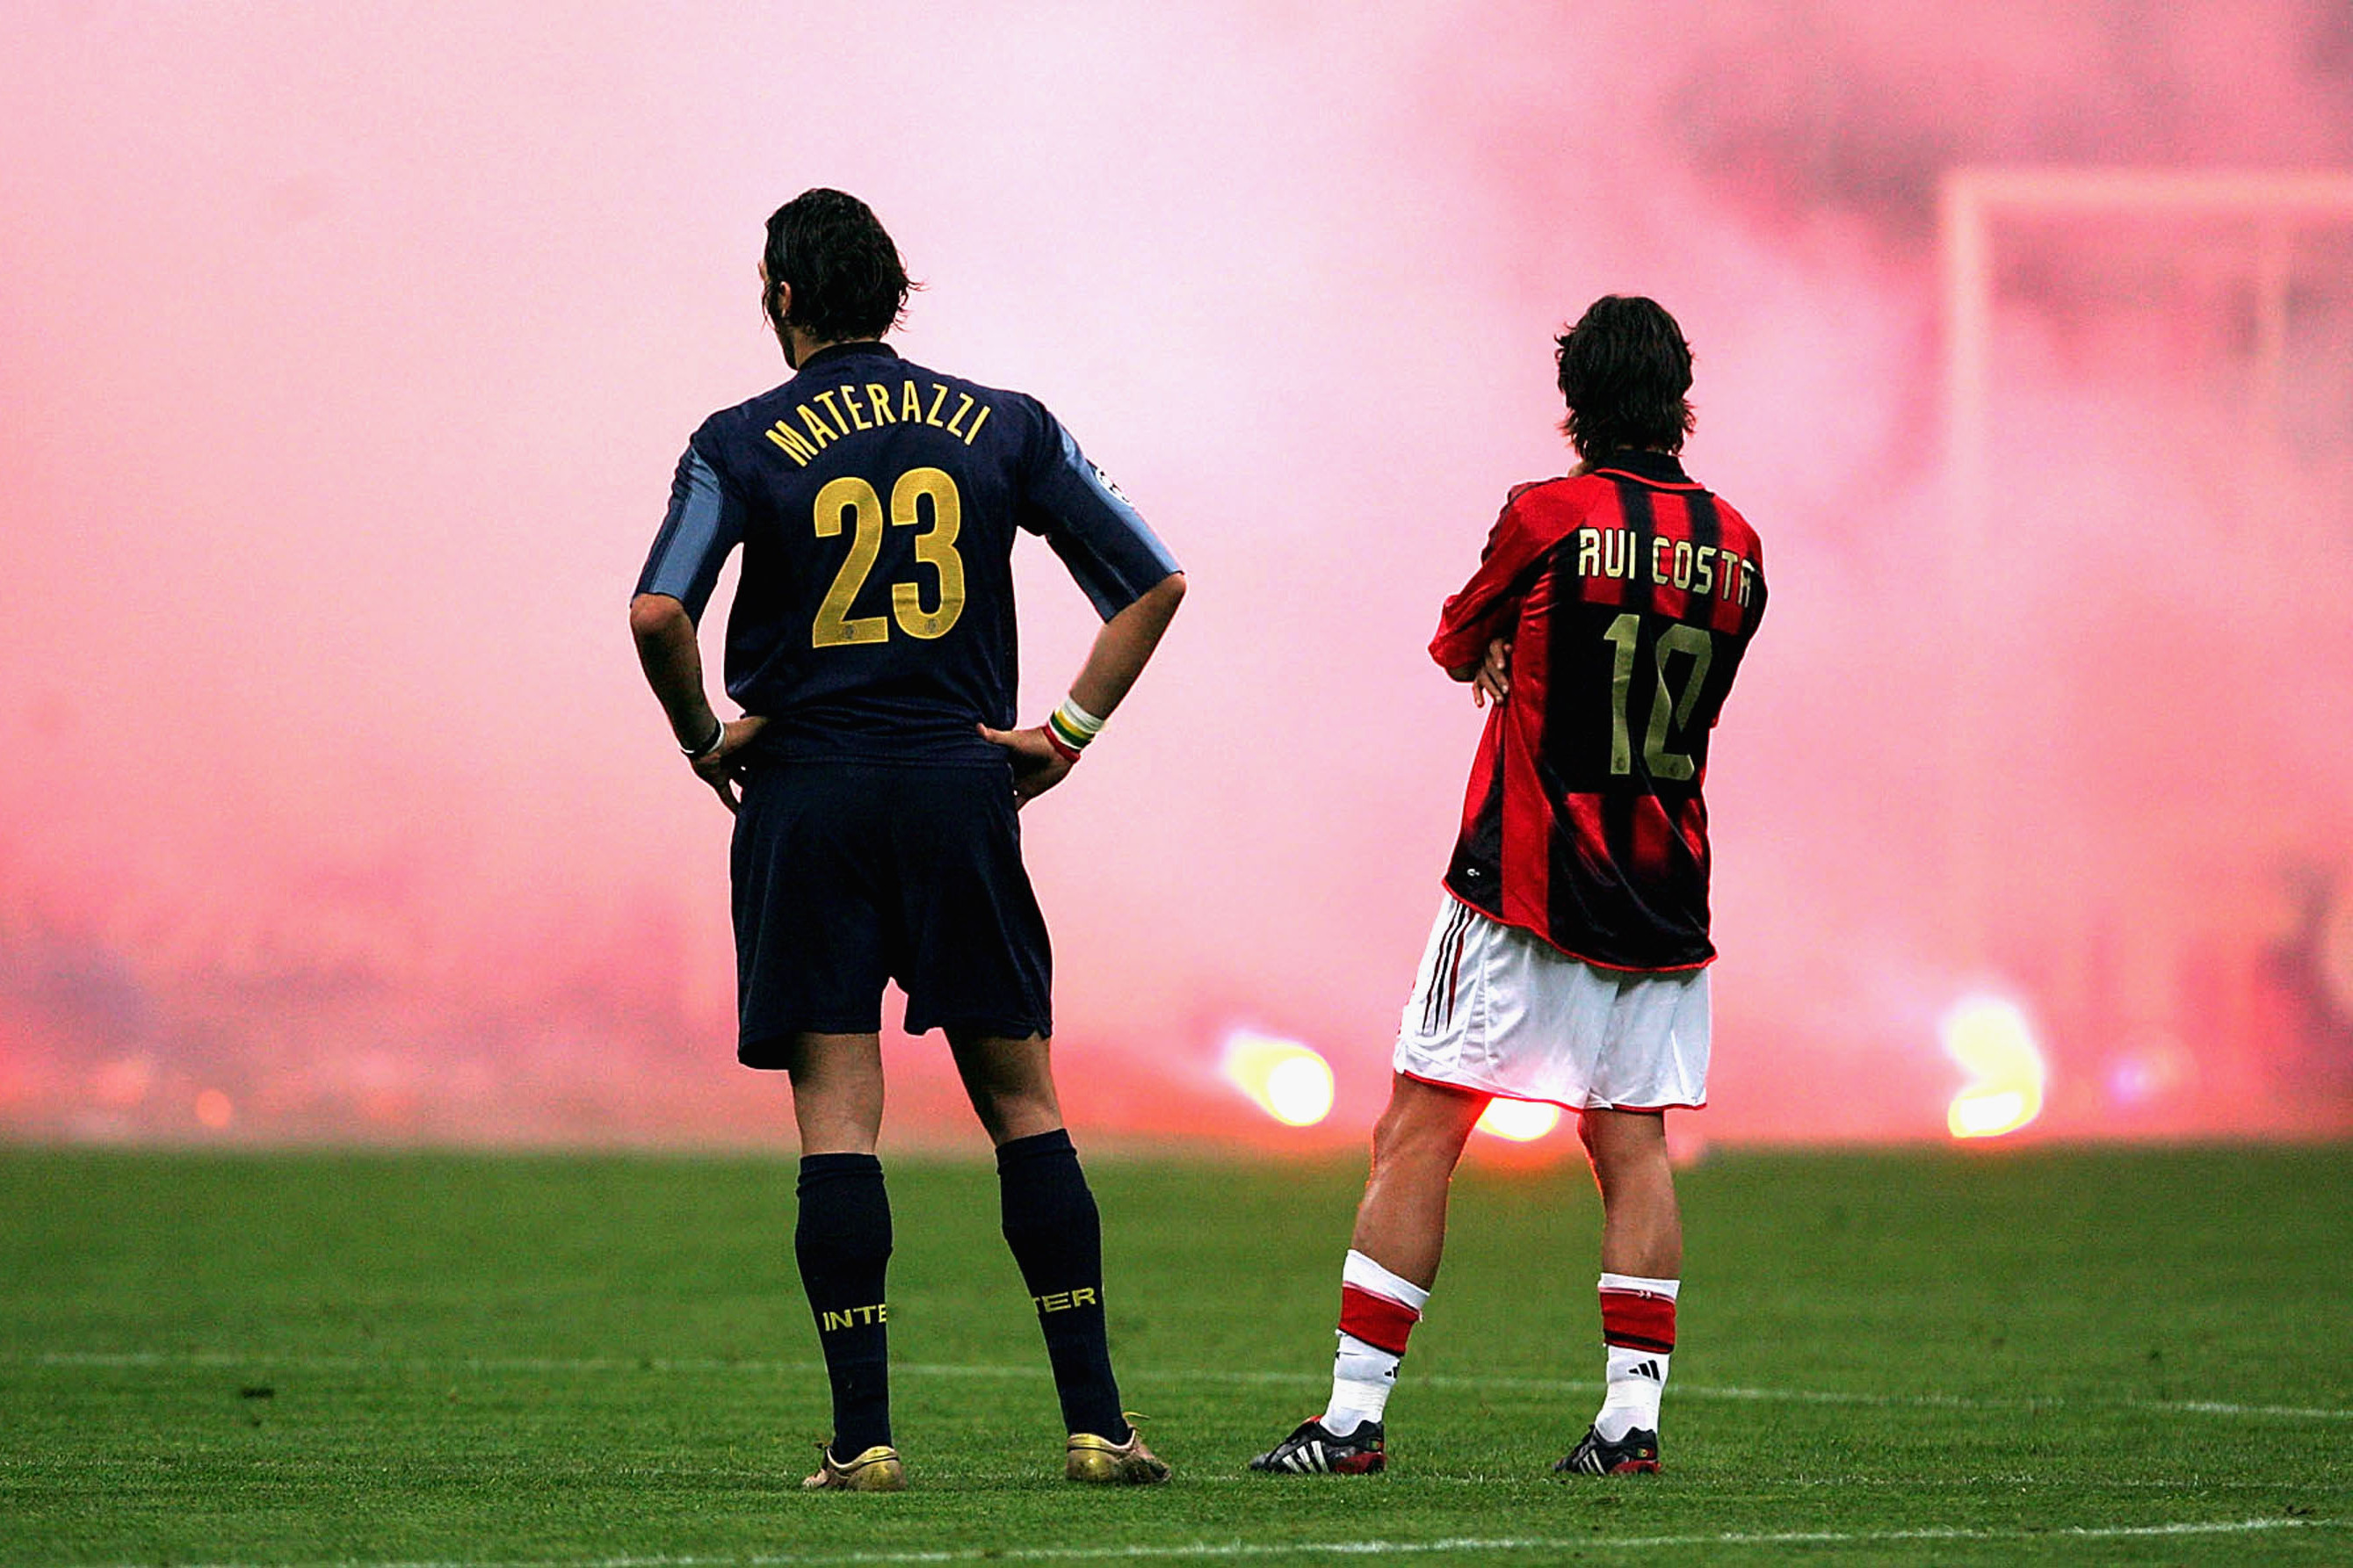 Milan Derby: The Fans' View as Inter and AC Milan Go Head-to-Head